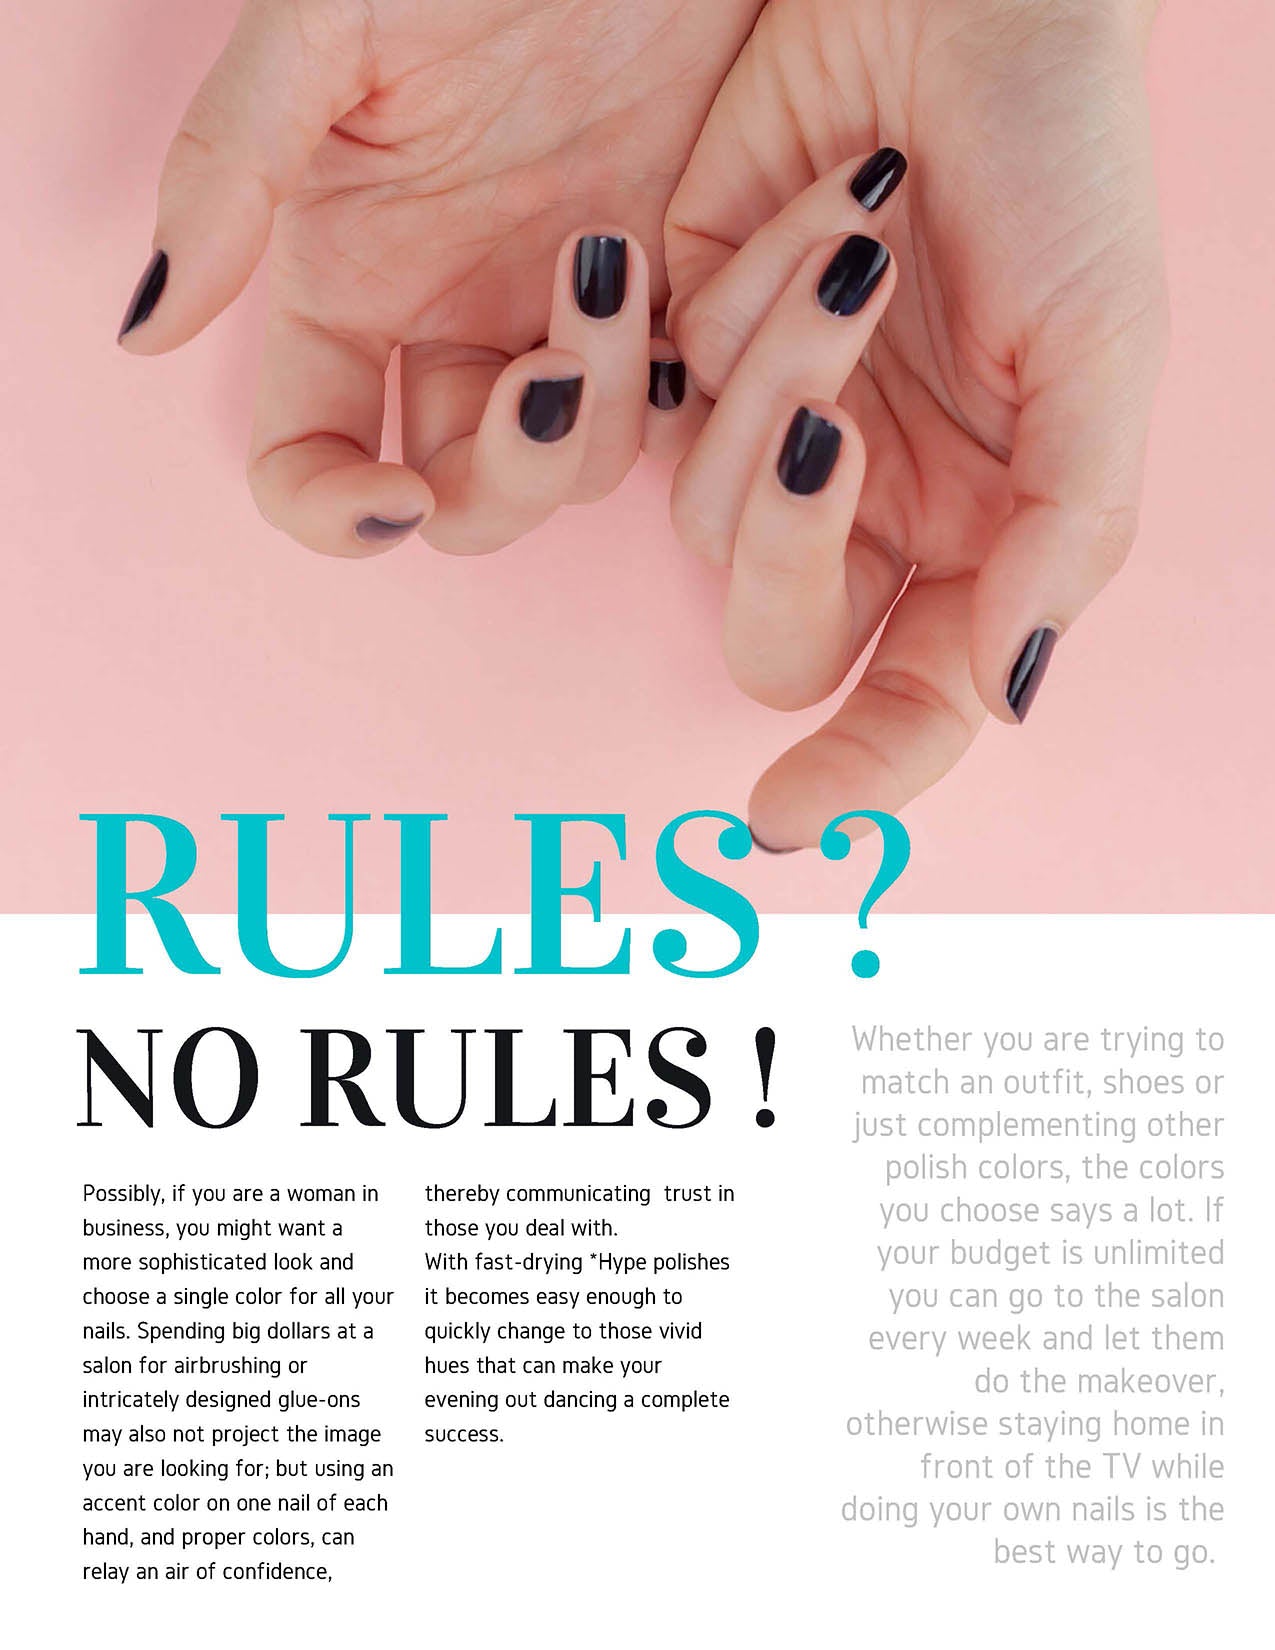 Don't worry about any rules - they are your nails